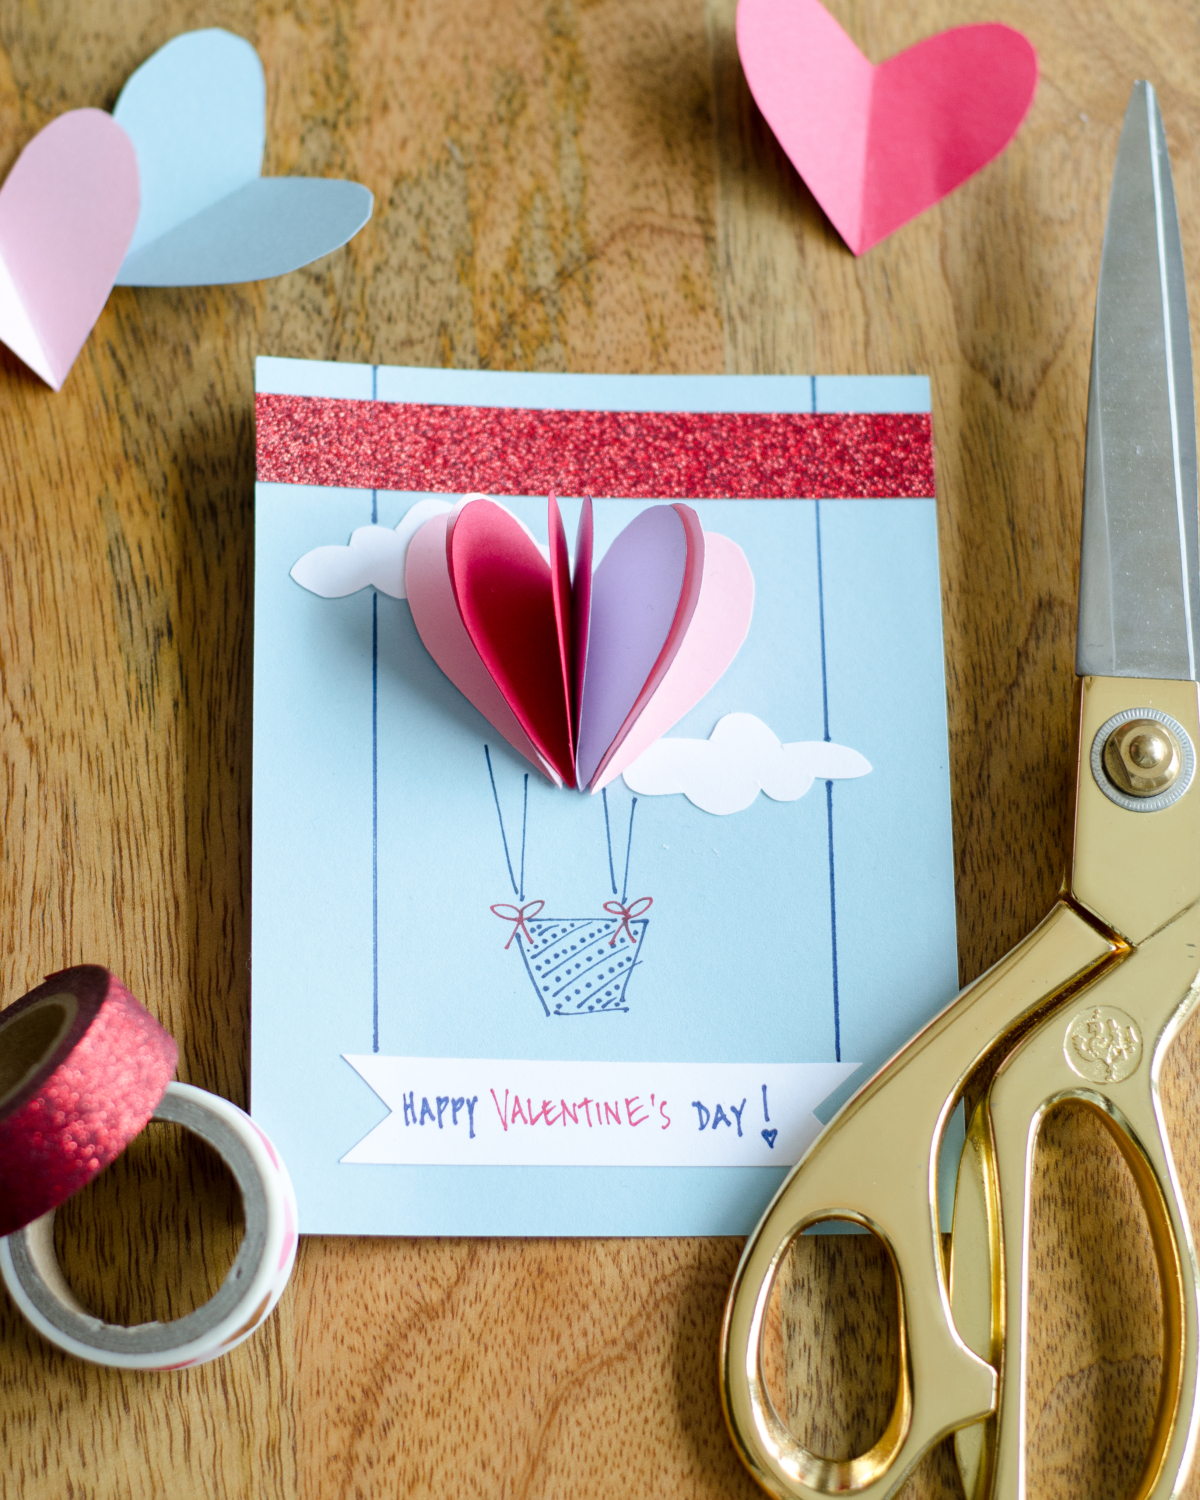 Easy DIY Valentines with 3D paper hearts. Great Valentine's craft for kids that can also be used for exchanging cards at school!